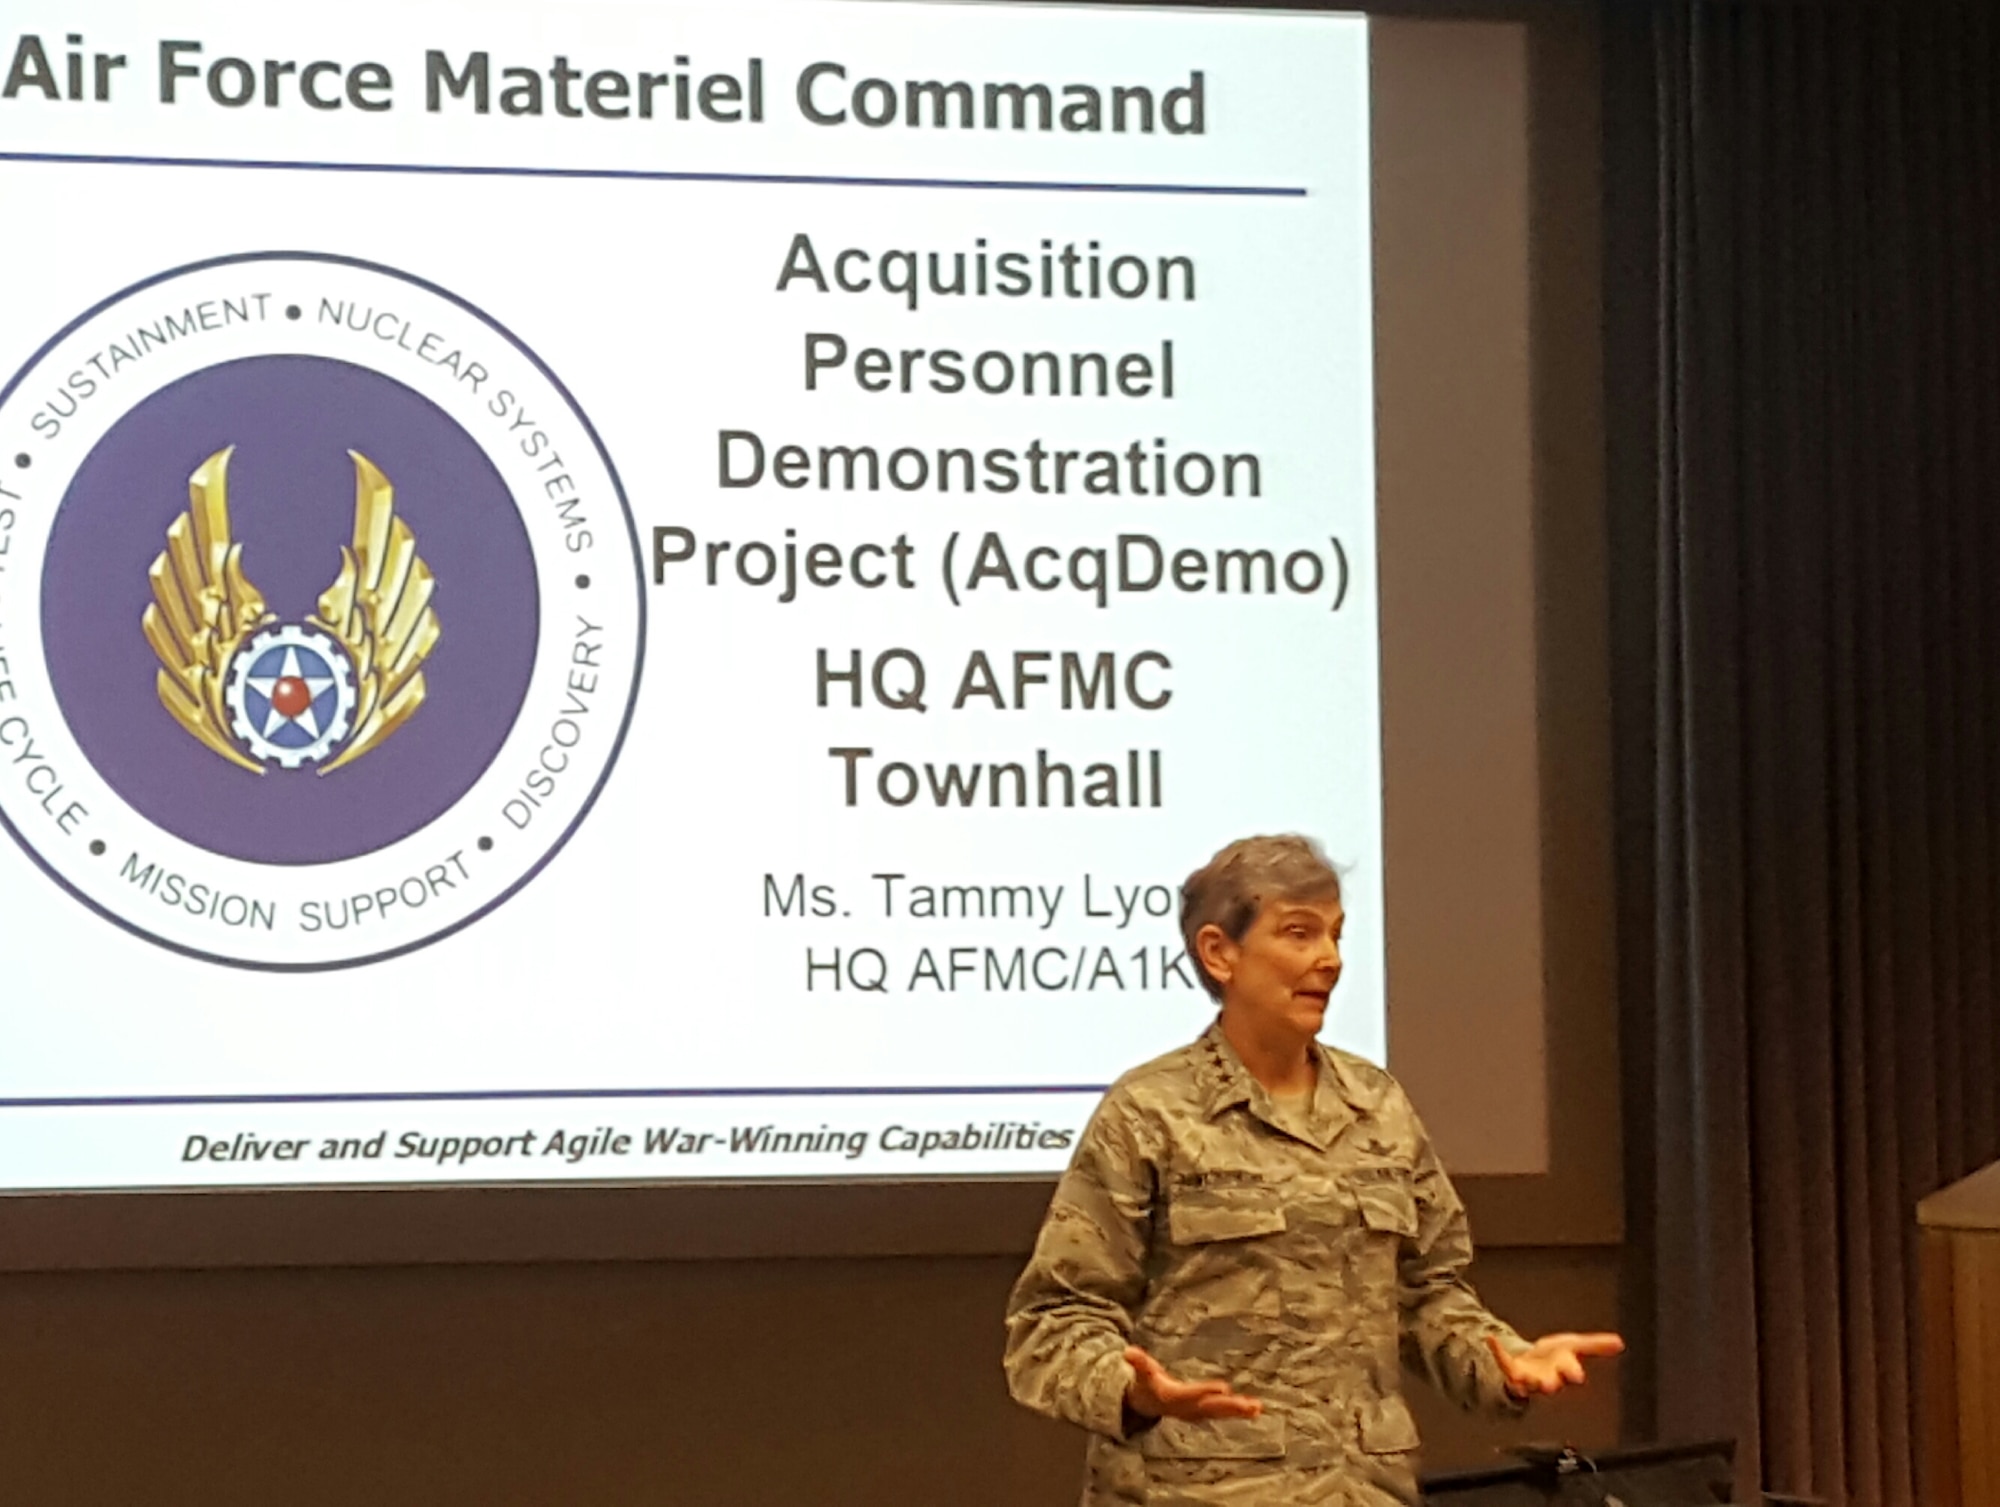 Gen. Ellen Pawlikowski, AFMC commander, speaks at an AcqDemo town hall meeting at AFMC headquarters on May 12, 2016. Town hall meetings and informational sessions are being held at AFMC centers and complexes for some 13,000 AFMC employees who will transition to the AcqDemo pay system on June 12, 2016. (U.S. Air Force photo/Stacey Geiger)